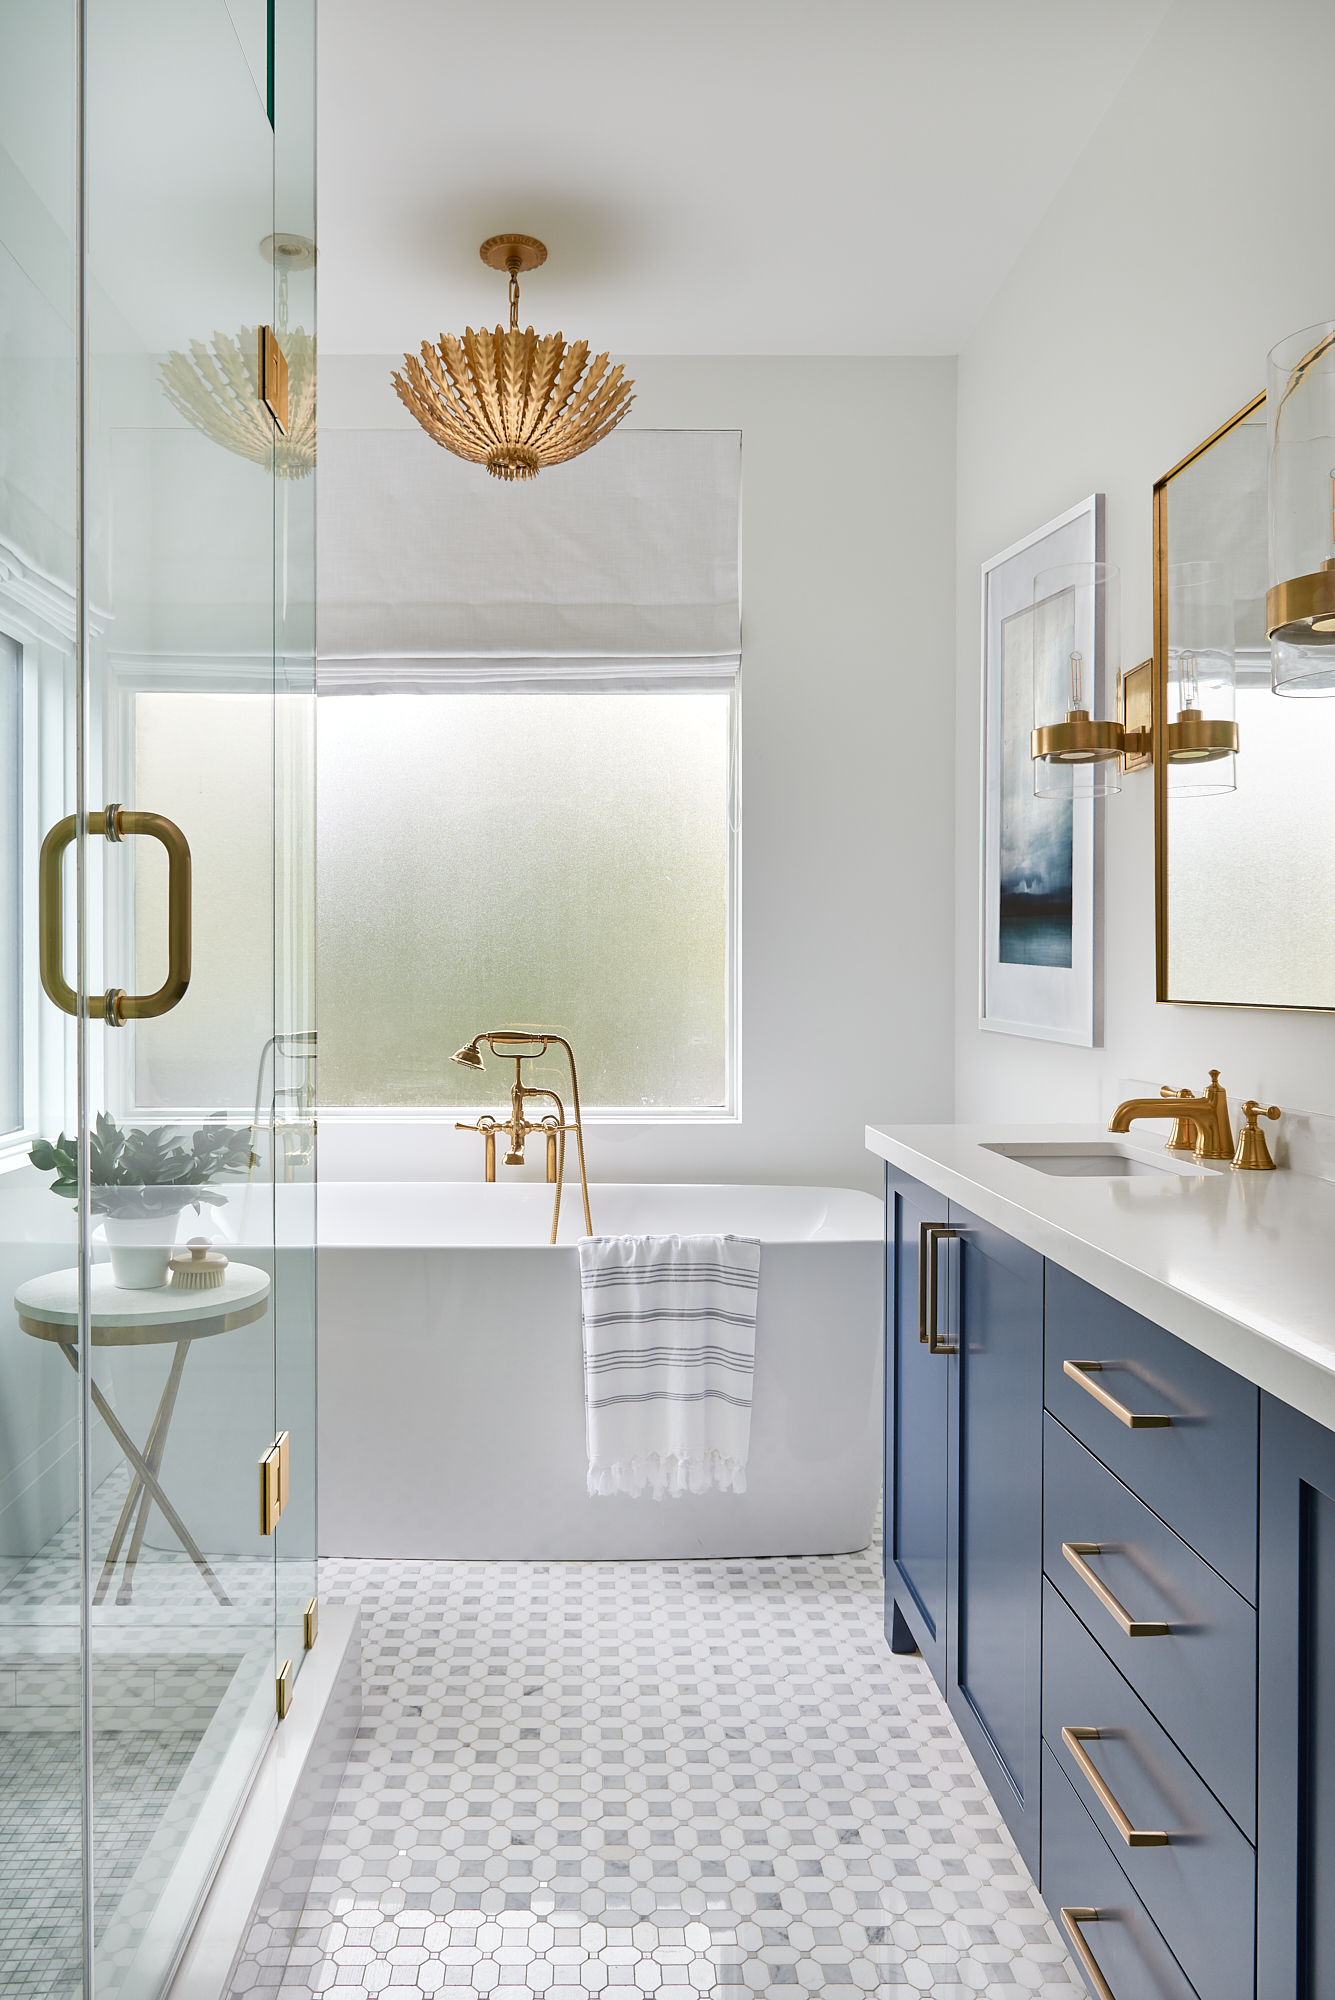 toronto bathroom after renovation by interior designer staci edwards with white walls, blue vanity, gold hardware, and beautiful light fixture above the bathtub